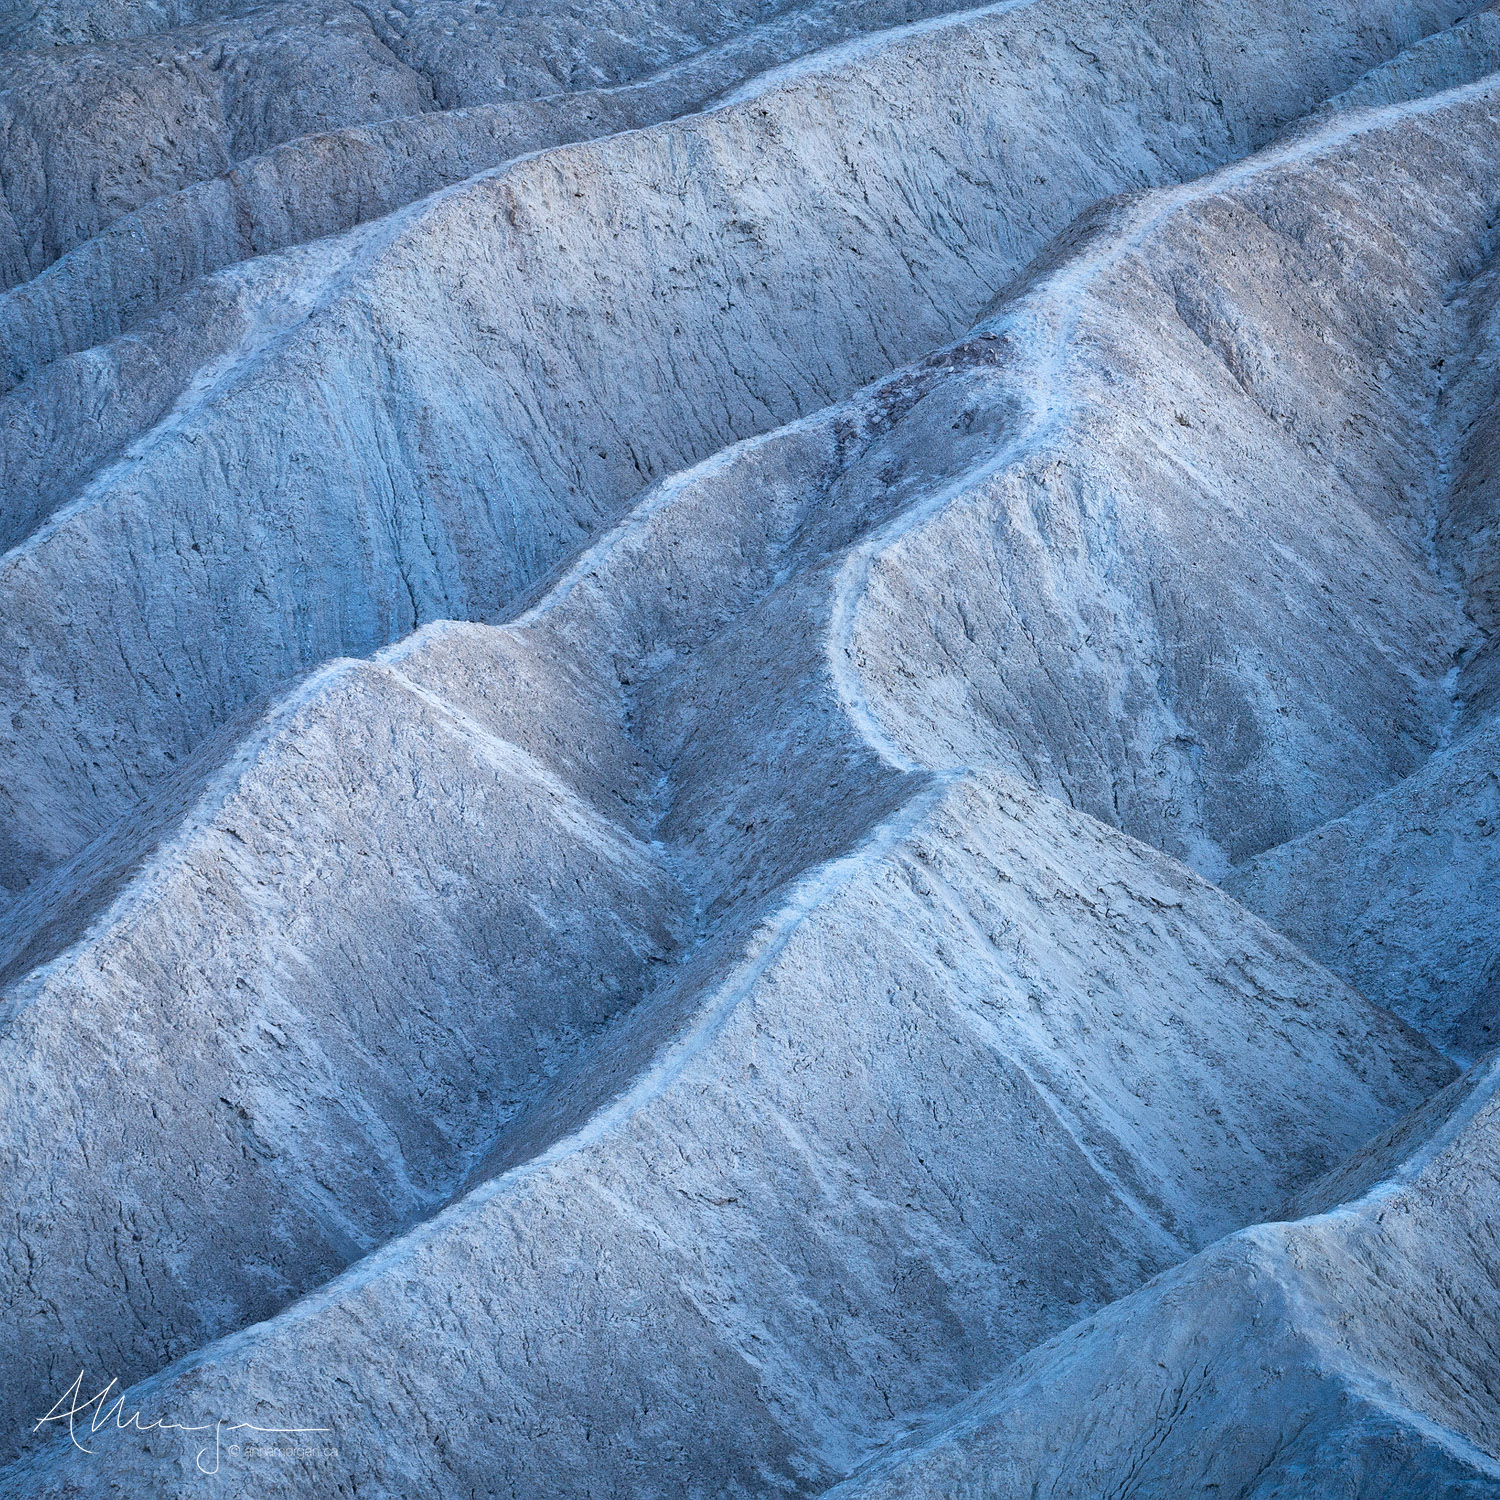 Close up view of geological formations at Zabriskie point during blue hour, Death Valley